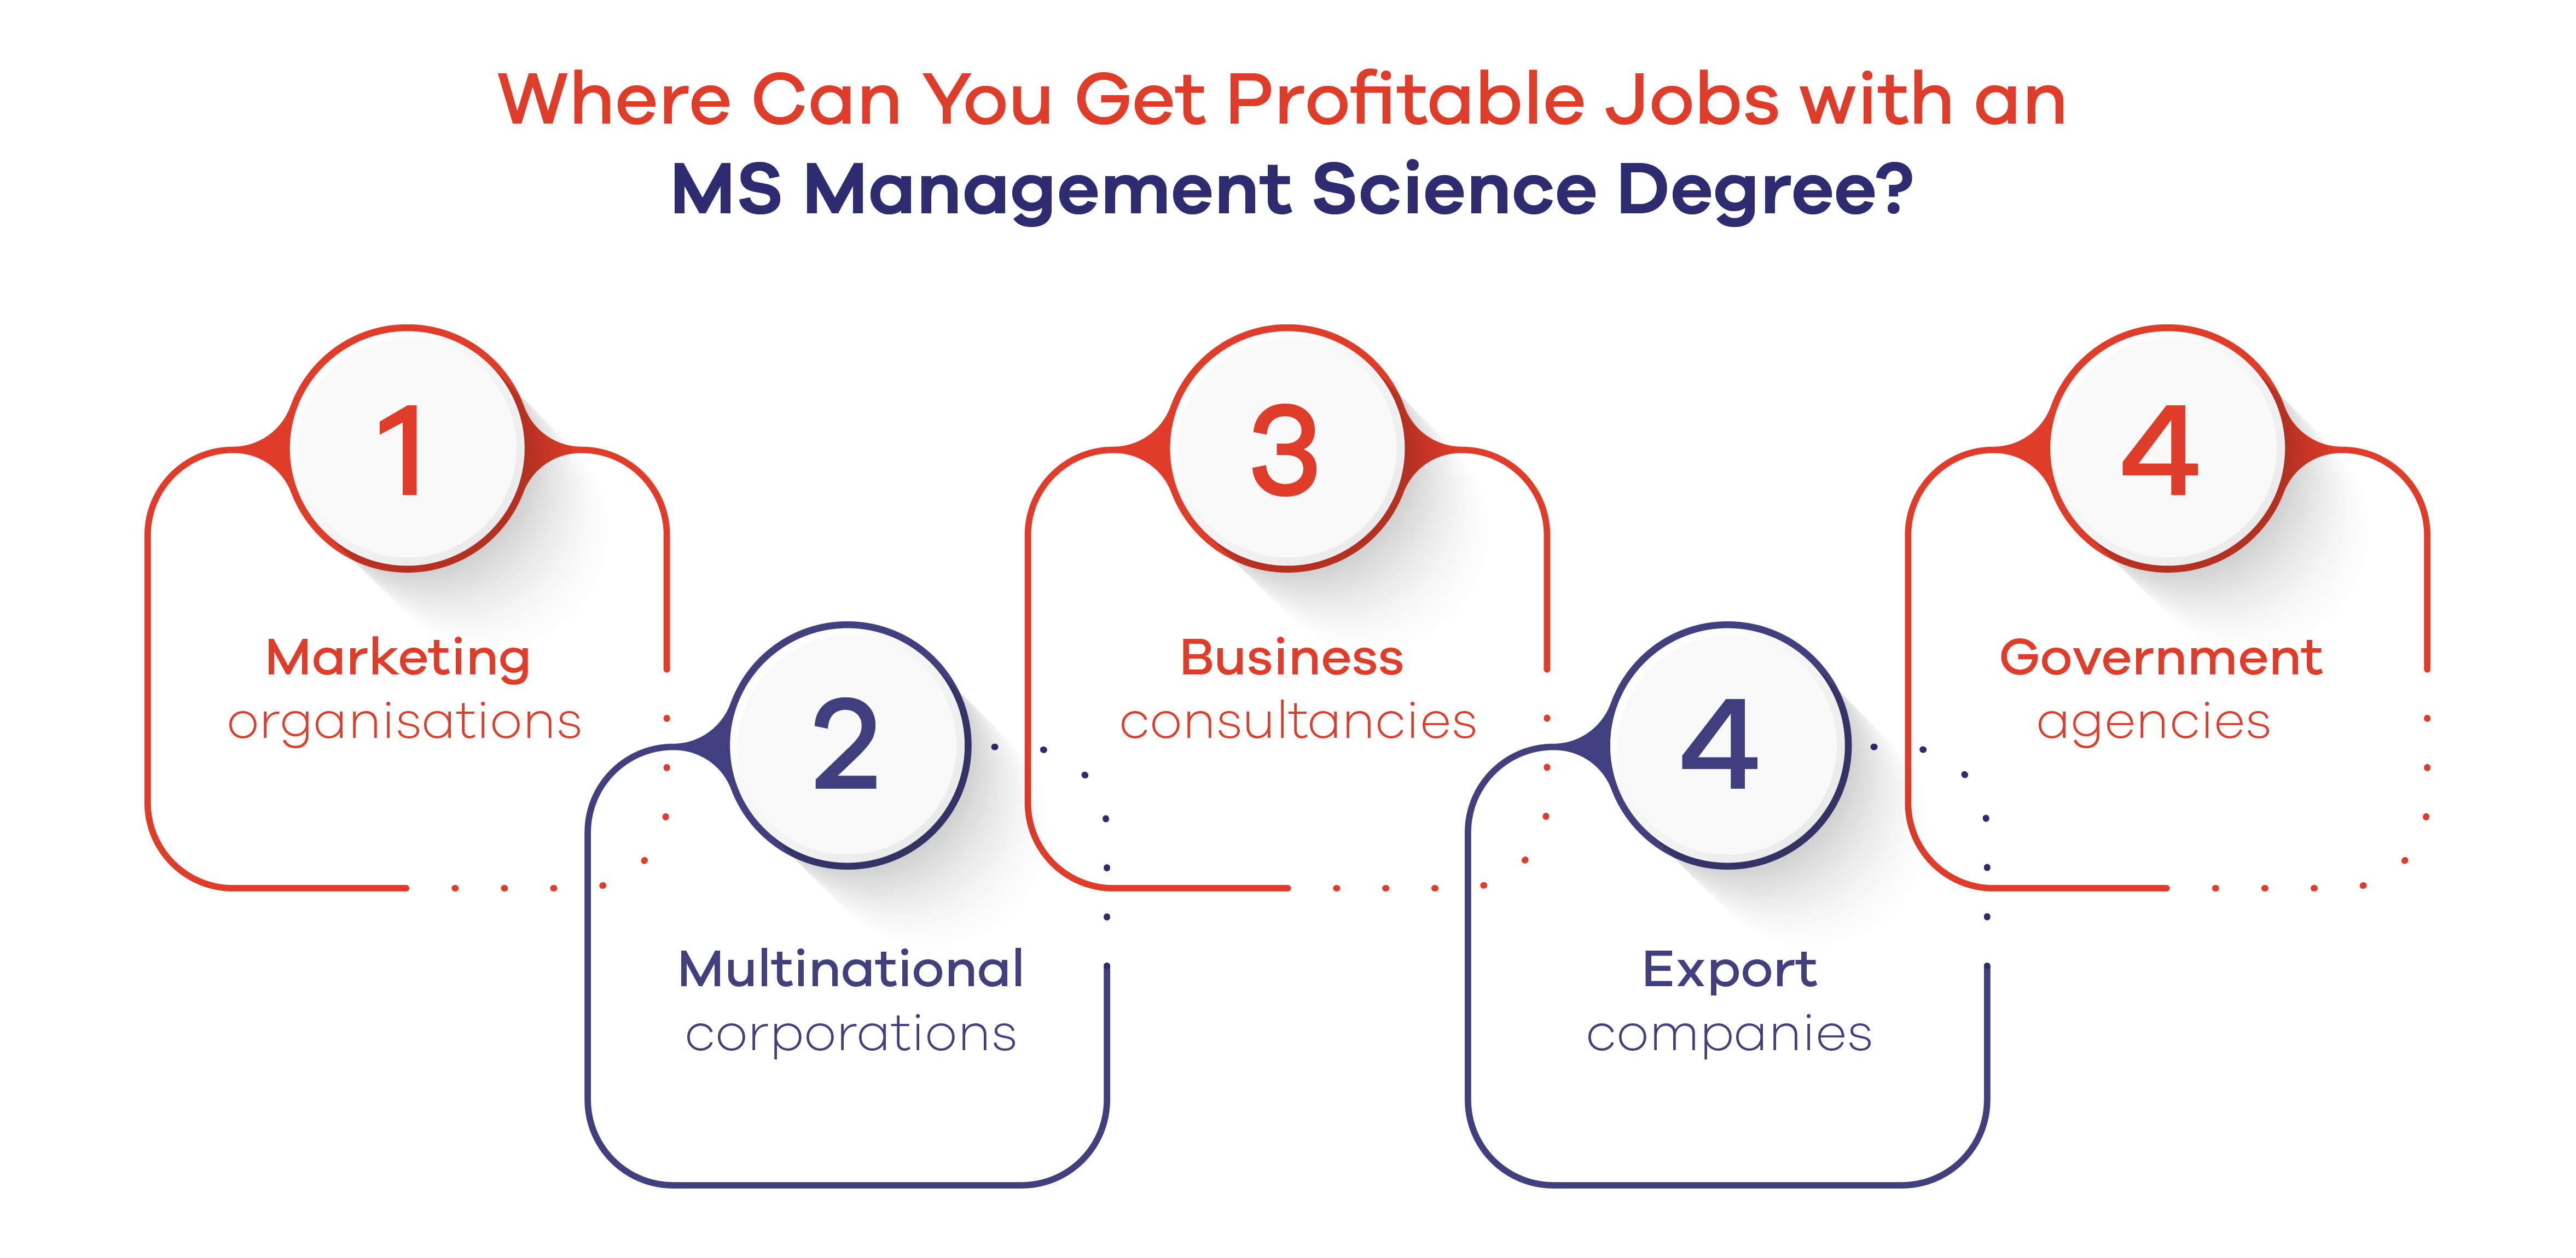 Where Can You Get Profitable Jobs with an MS Management Science Degree?